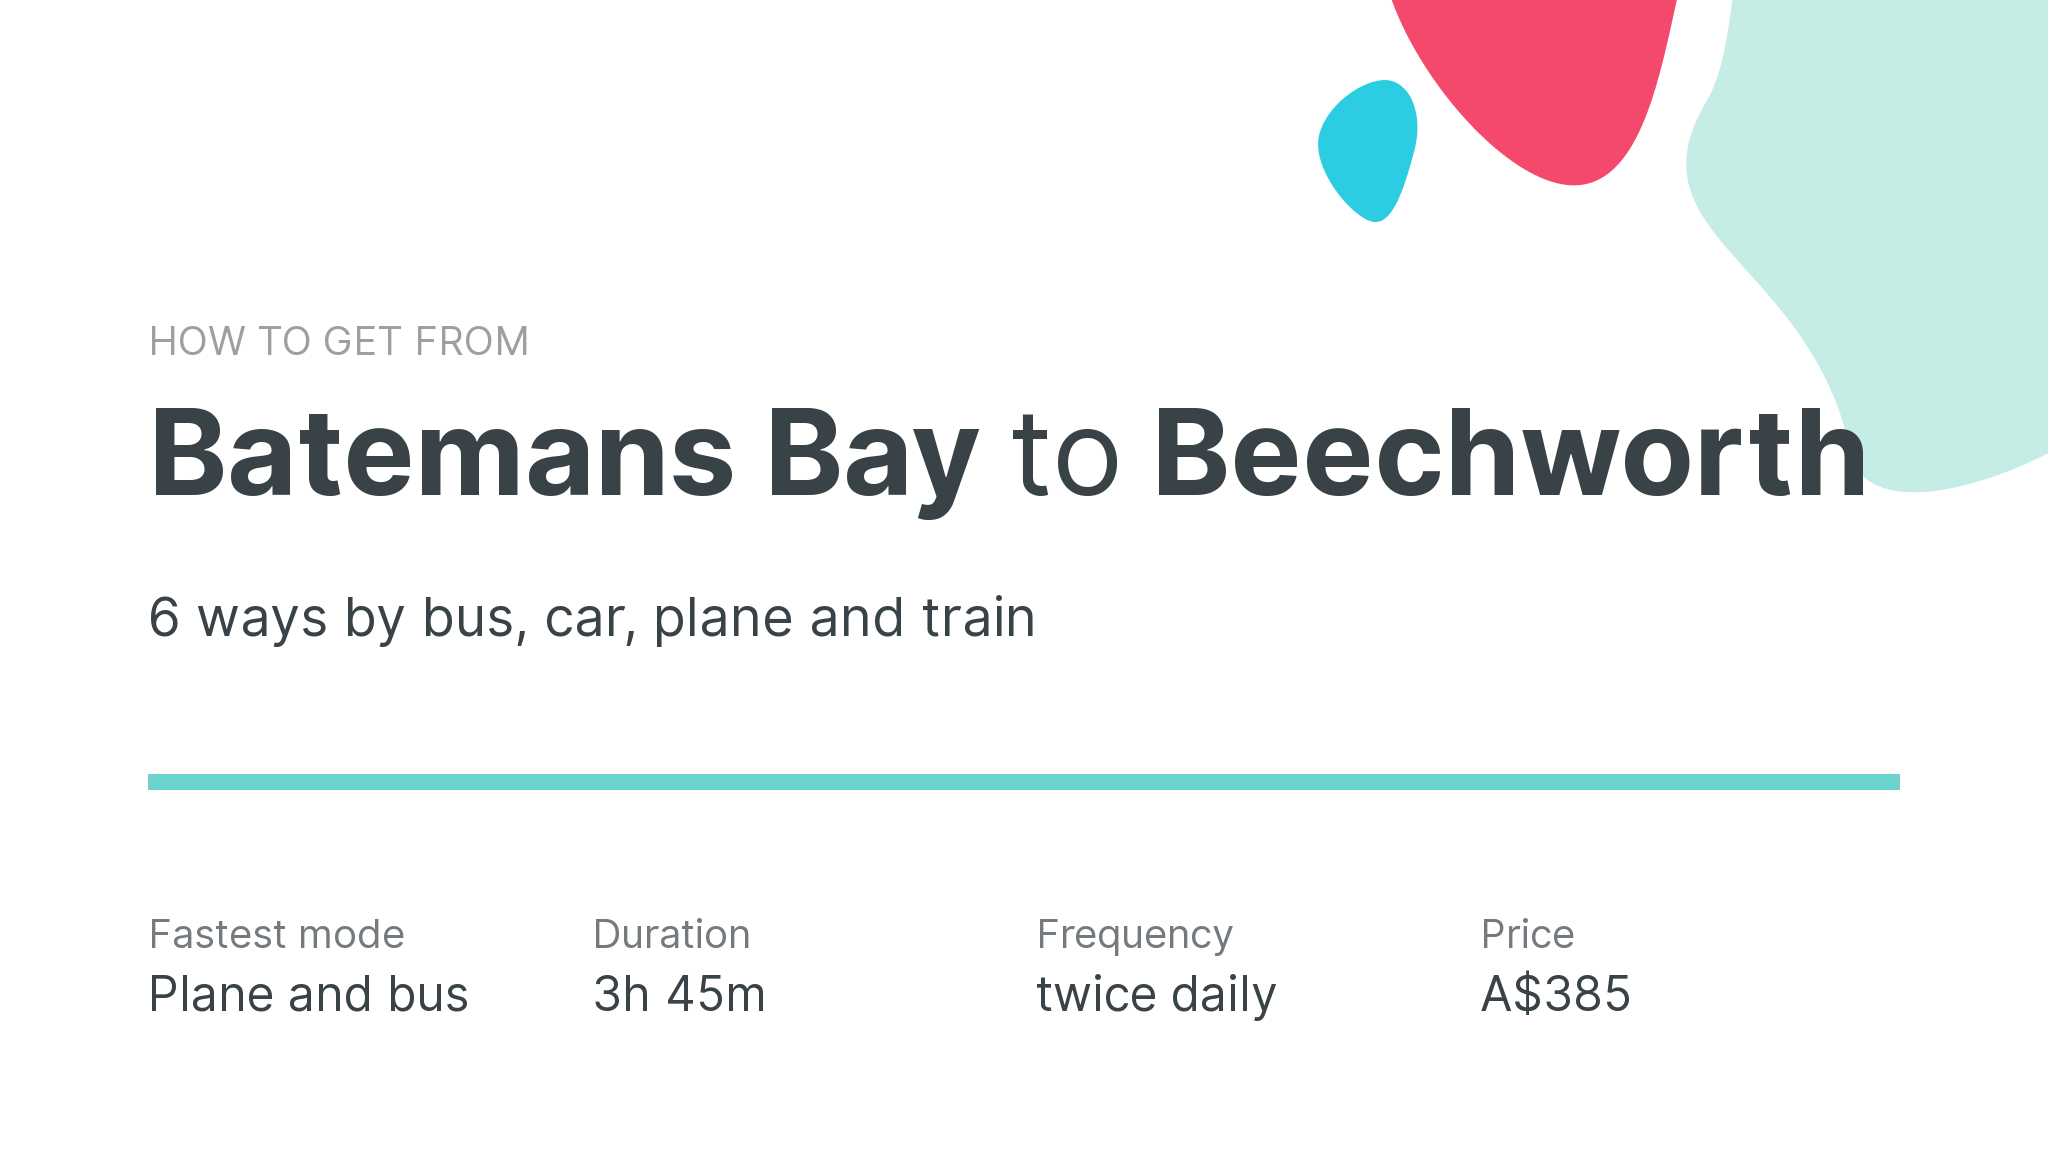 How do I get from Batemans Bay to Beechworth